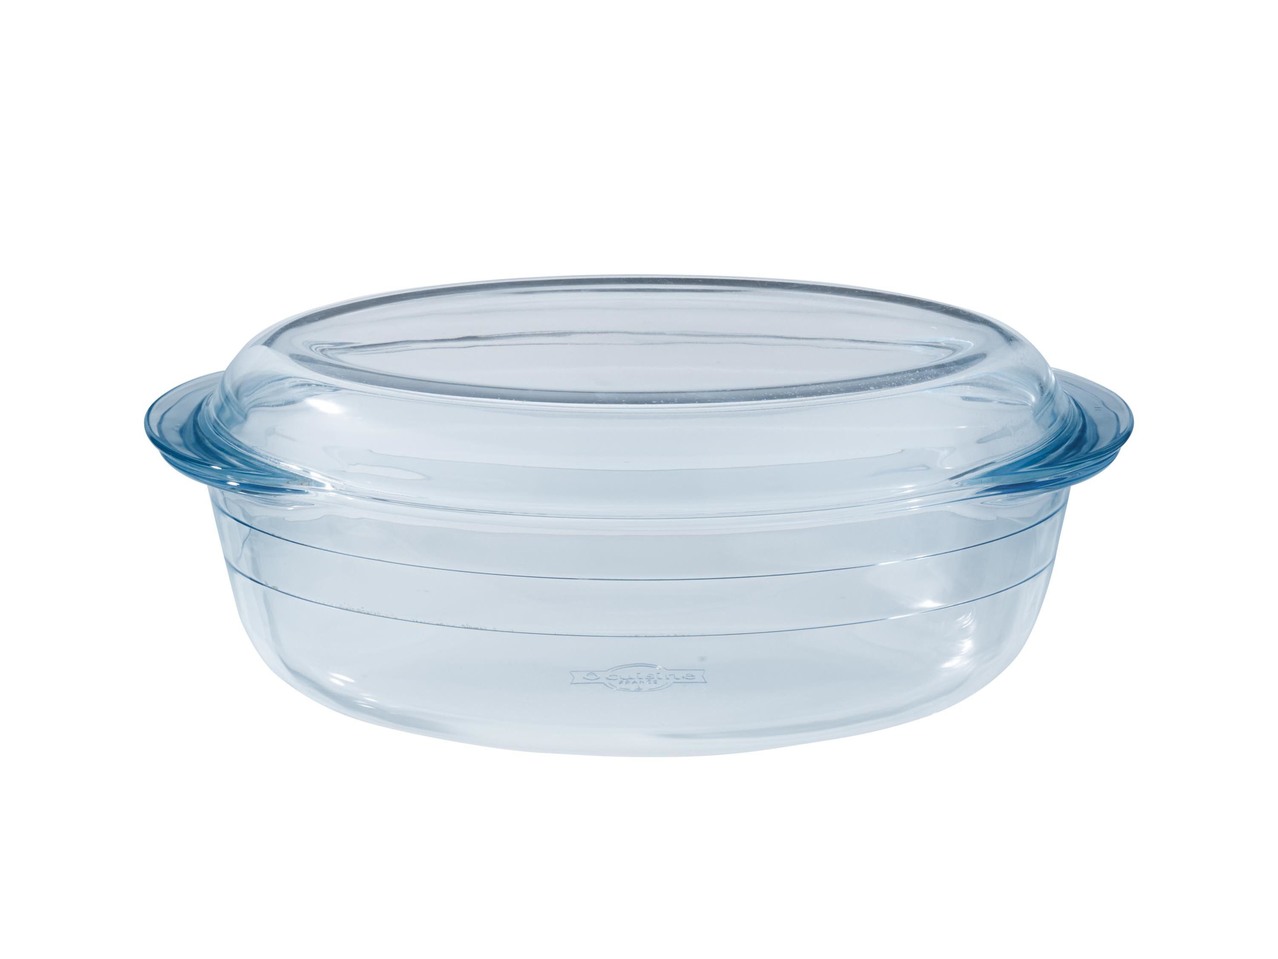 Glass Baking or Casserole Dish with Lid, 2 pieces